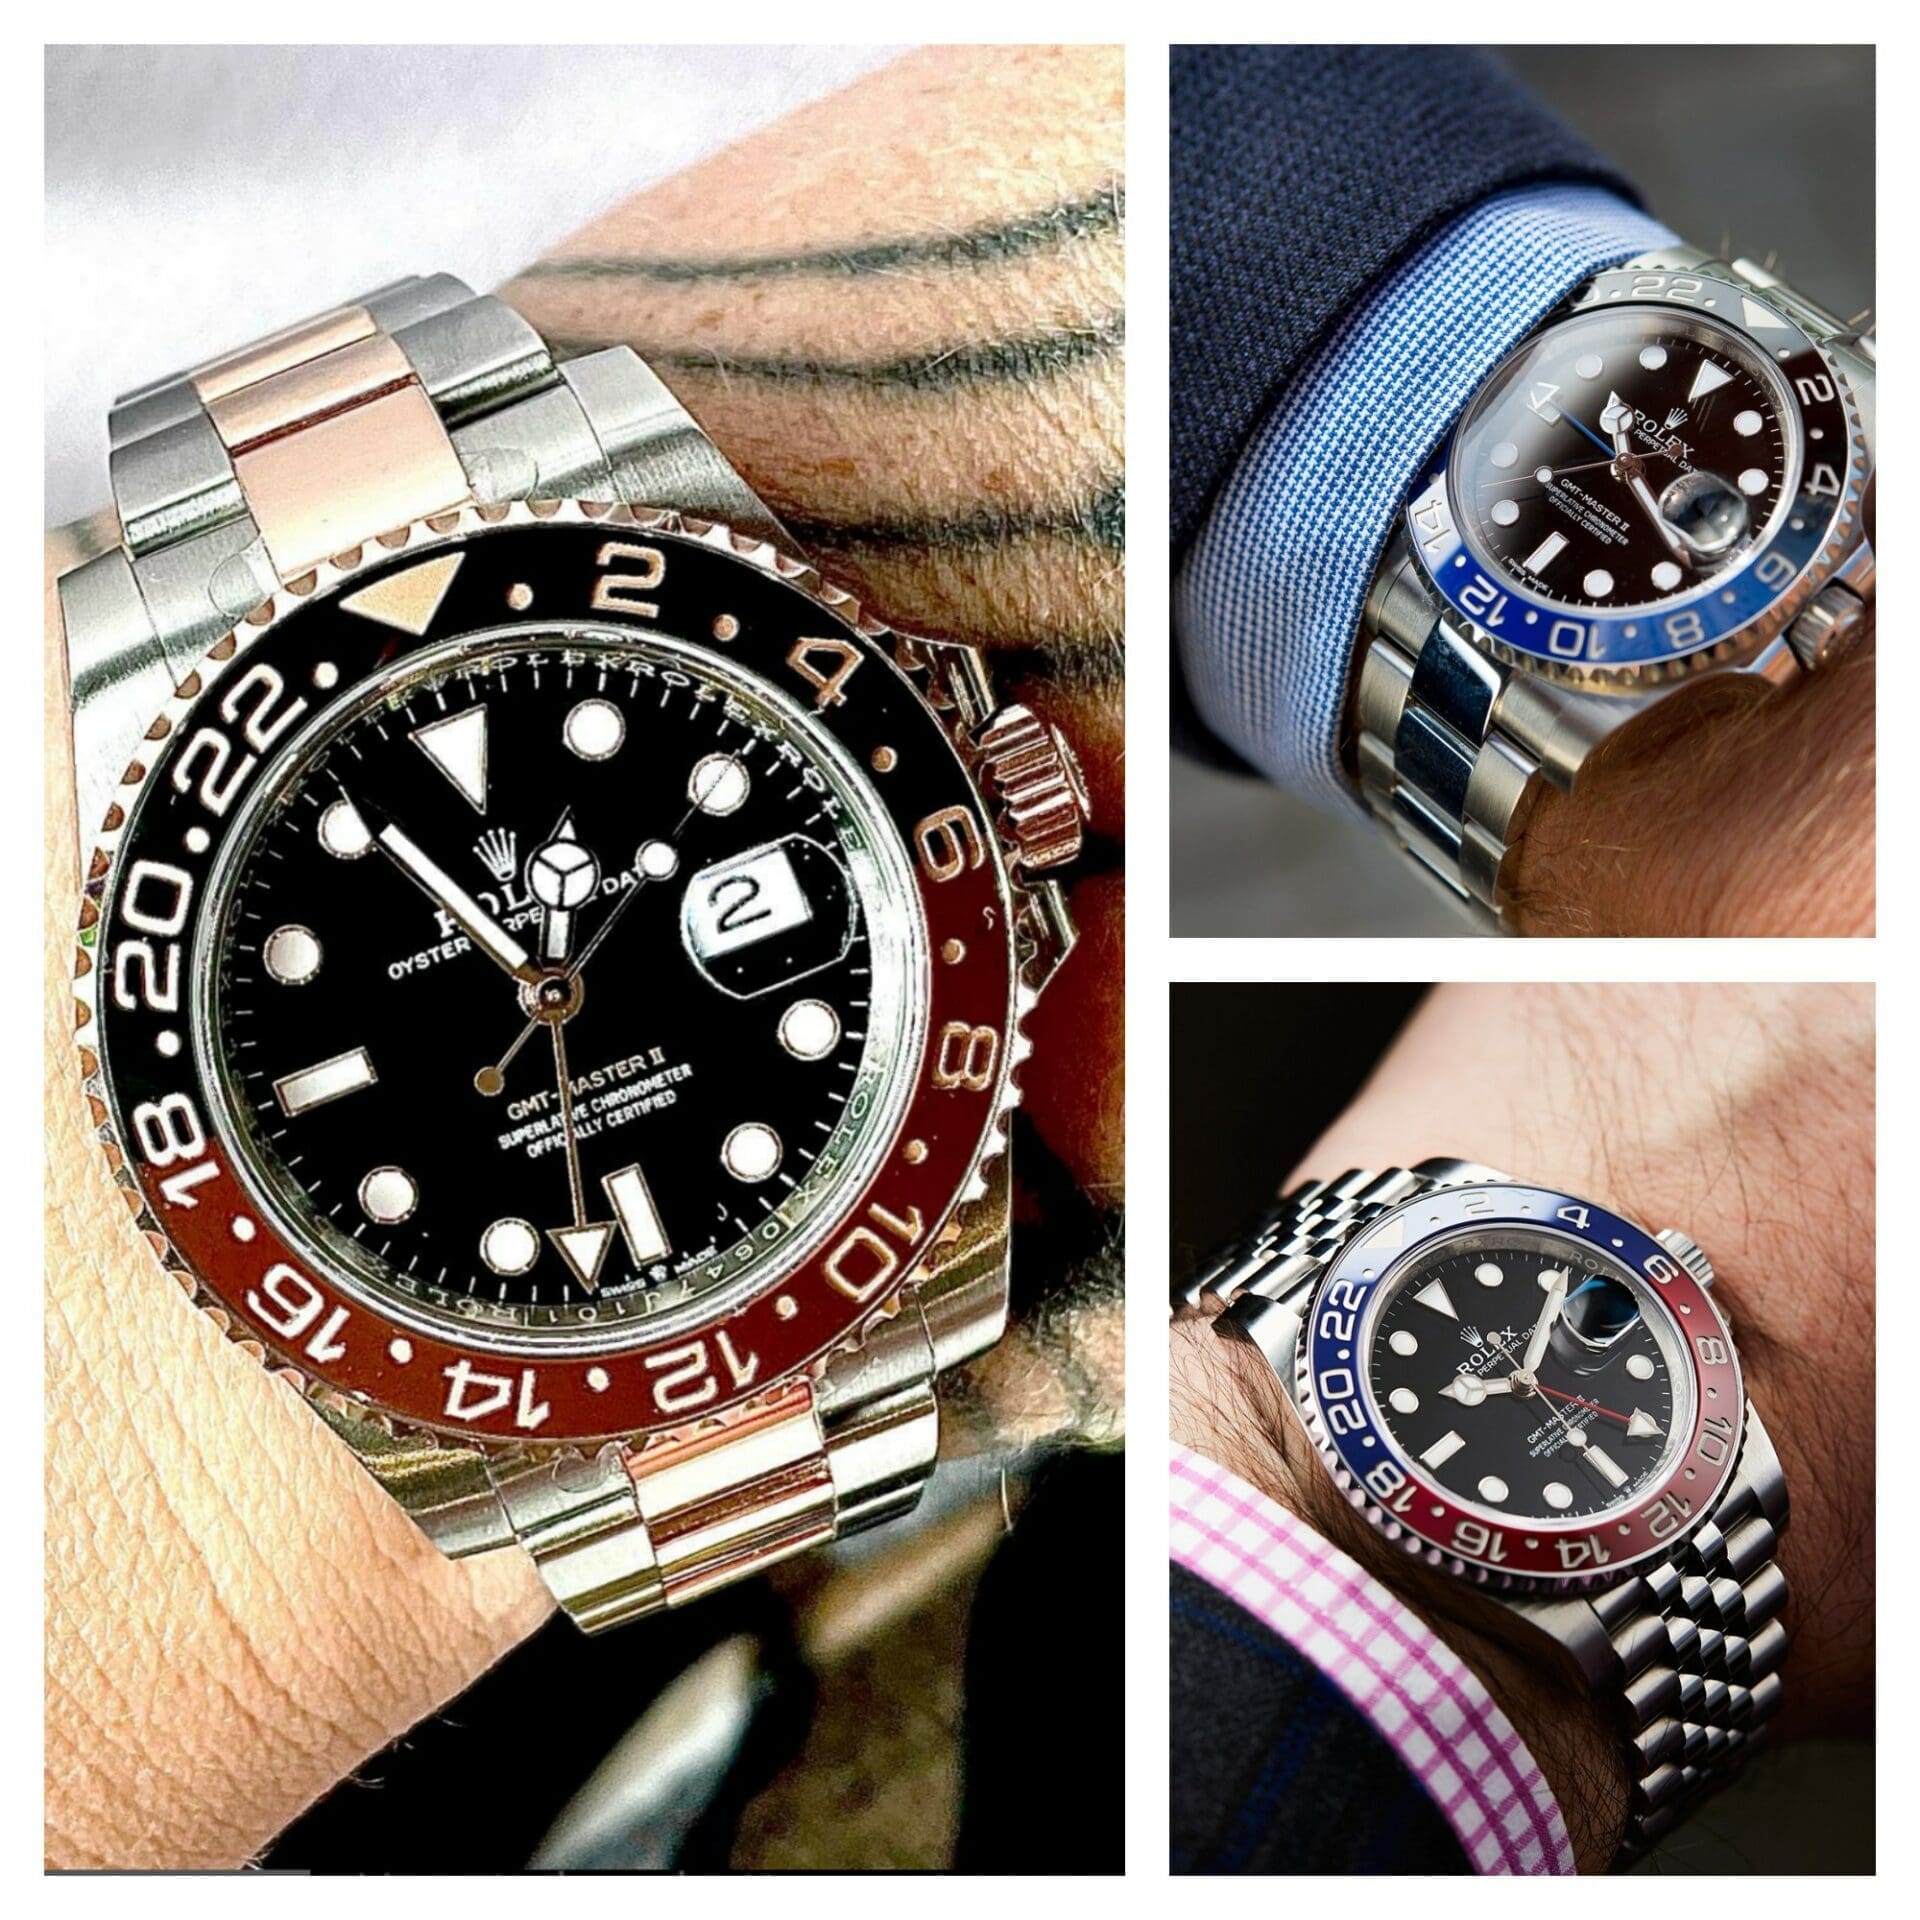 Ruminations on my Rolex GMT journey